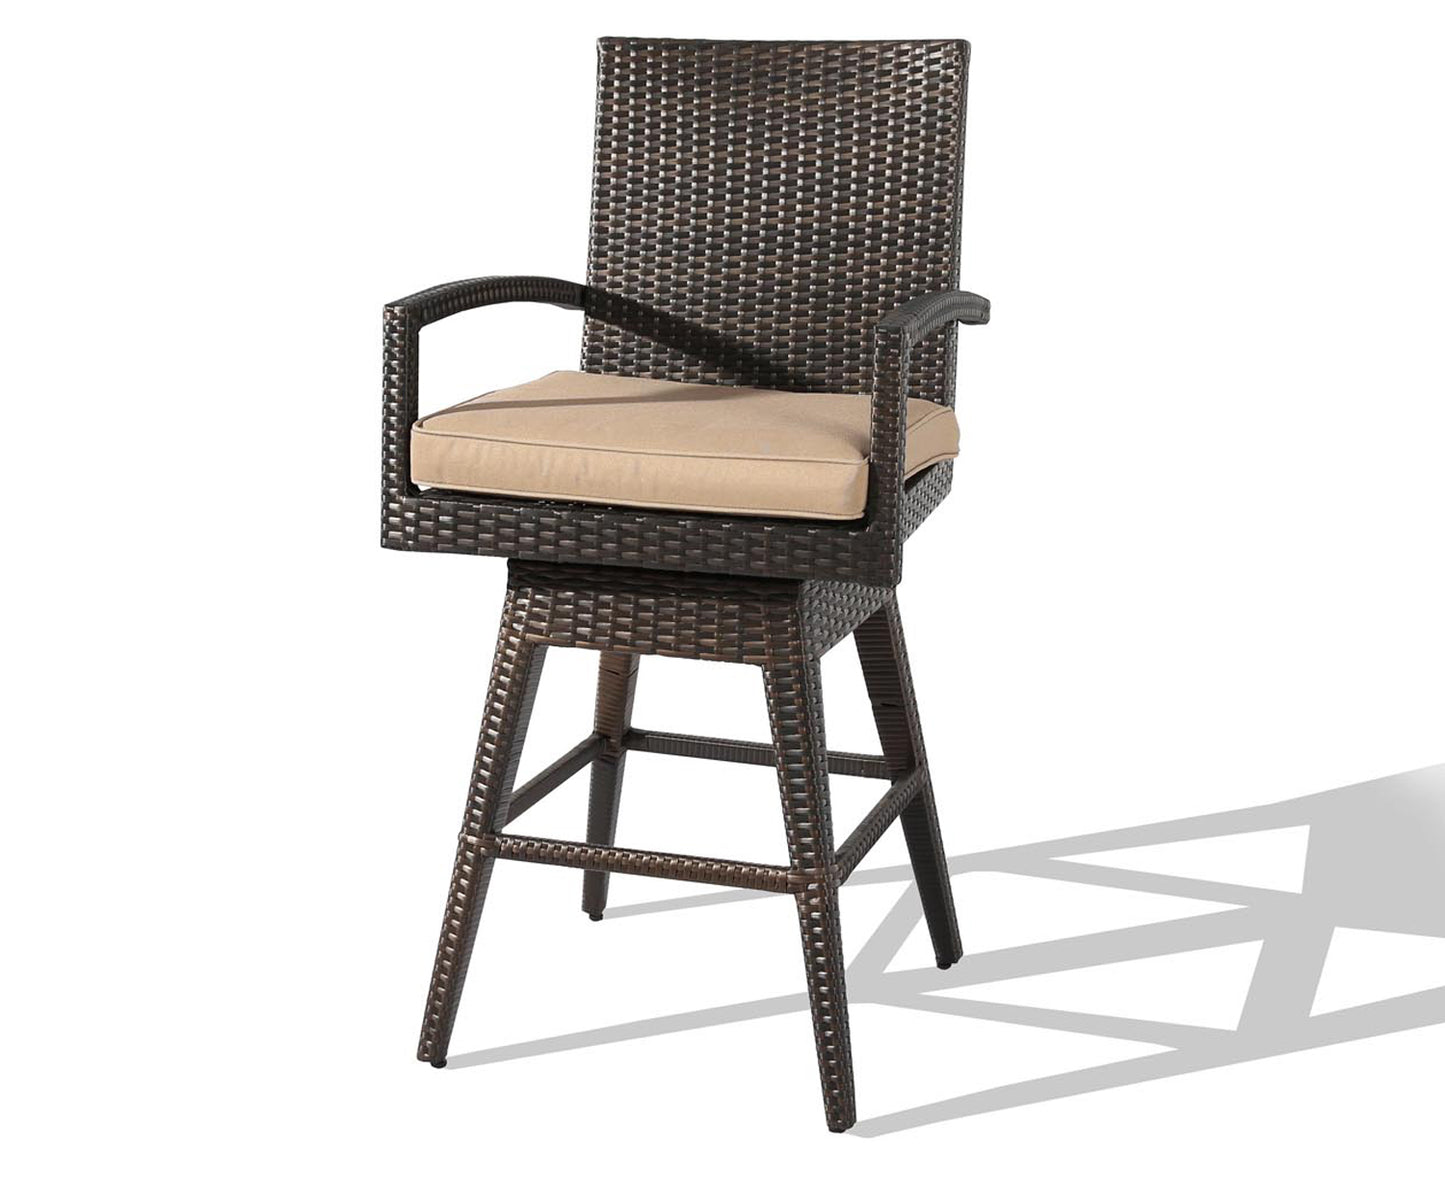 1 Piece Outdoor Wicker Bar Stools Patio All-Weather Rattan Swivel Dining Chairs with Cushion, Brown